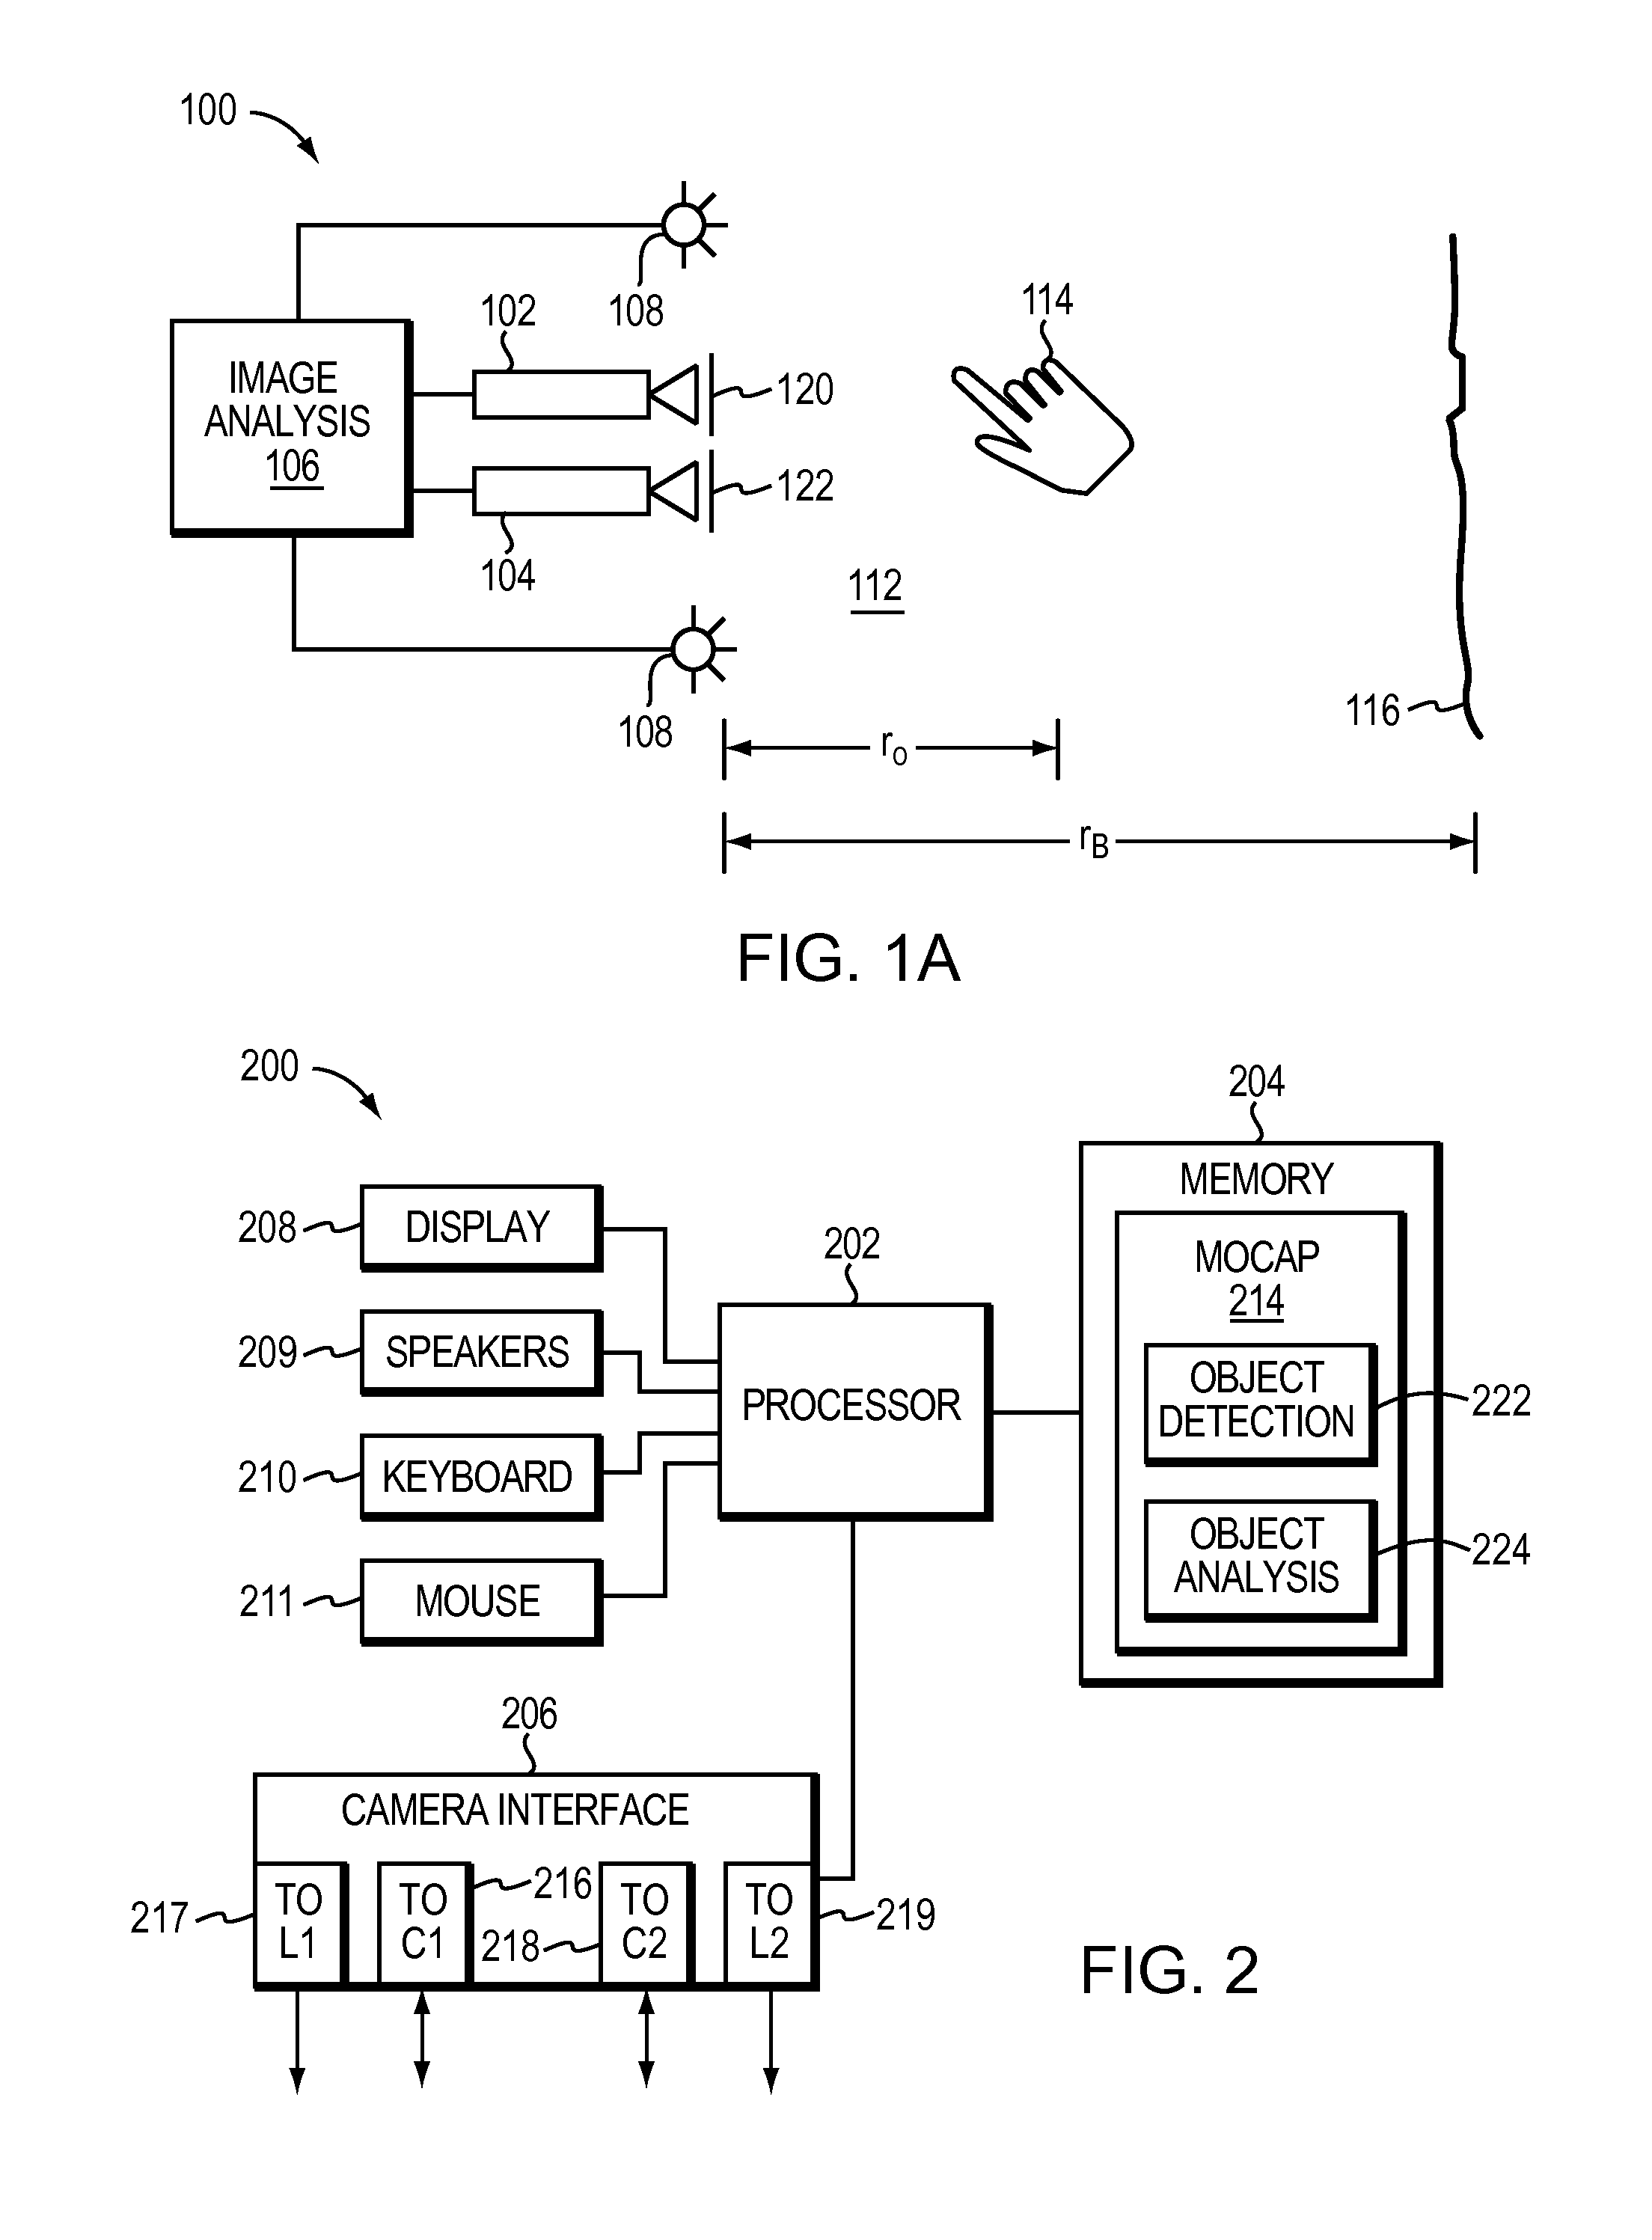 Object detection and tracking with variable-field illumination devices